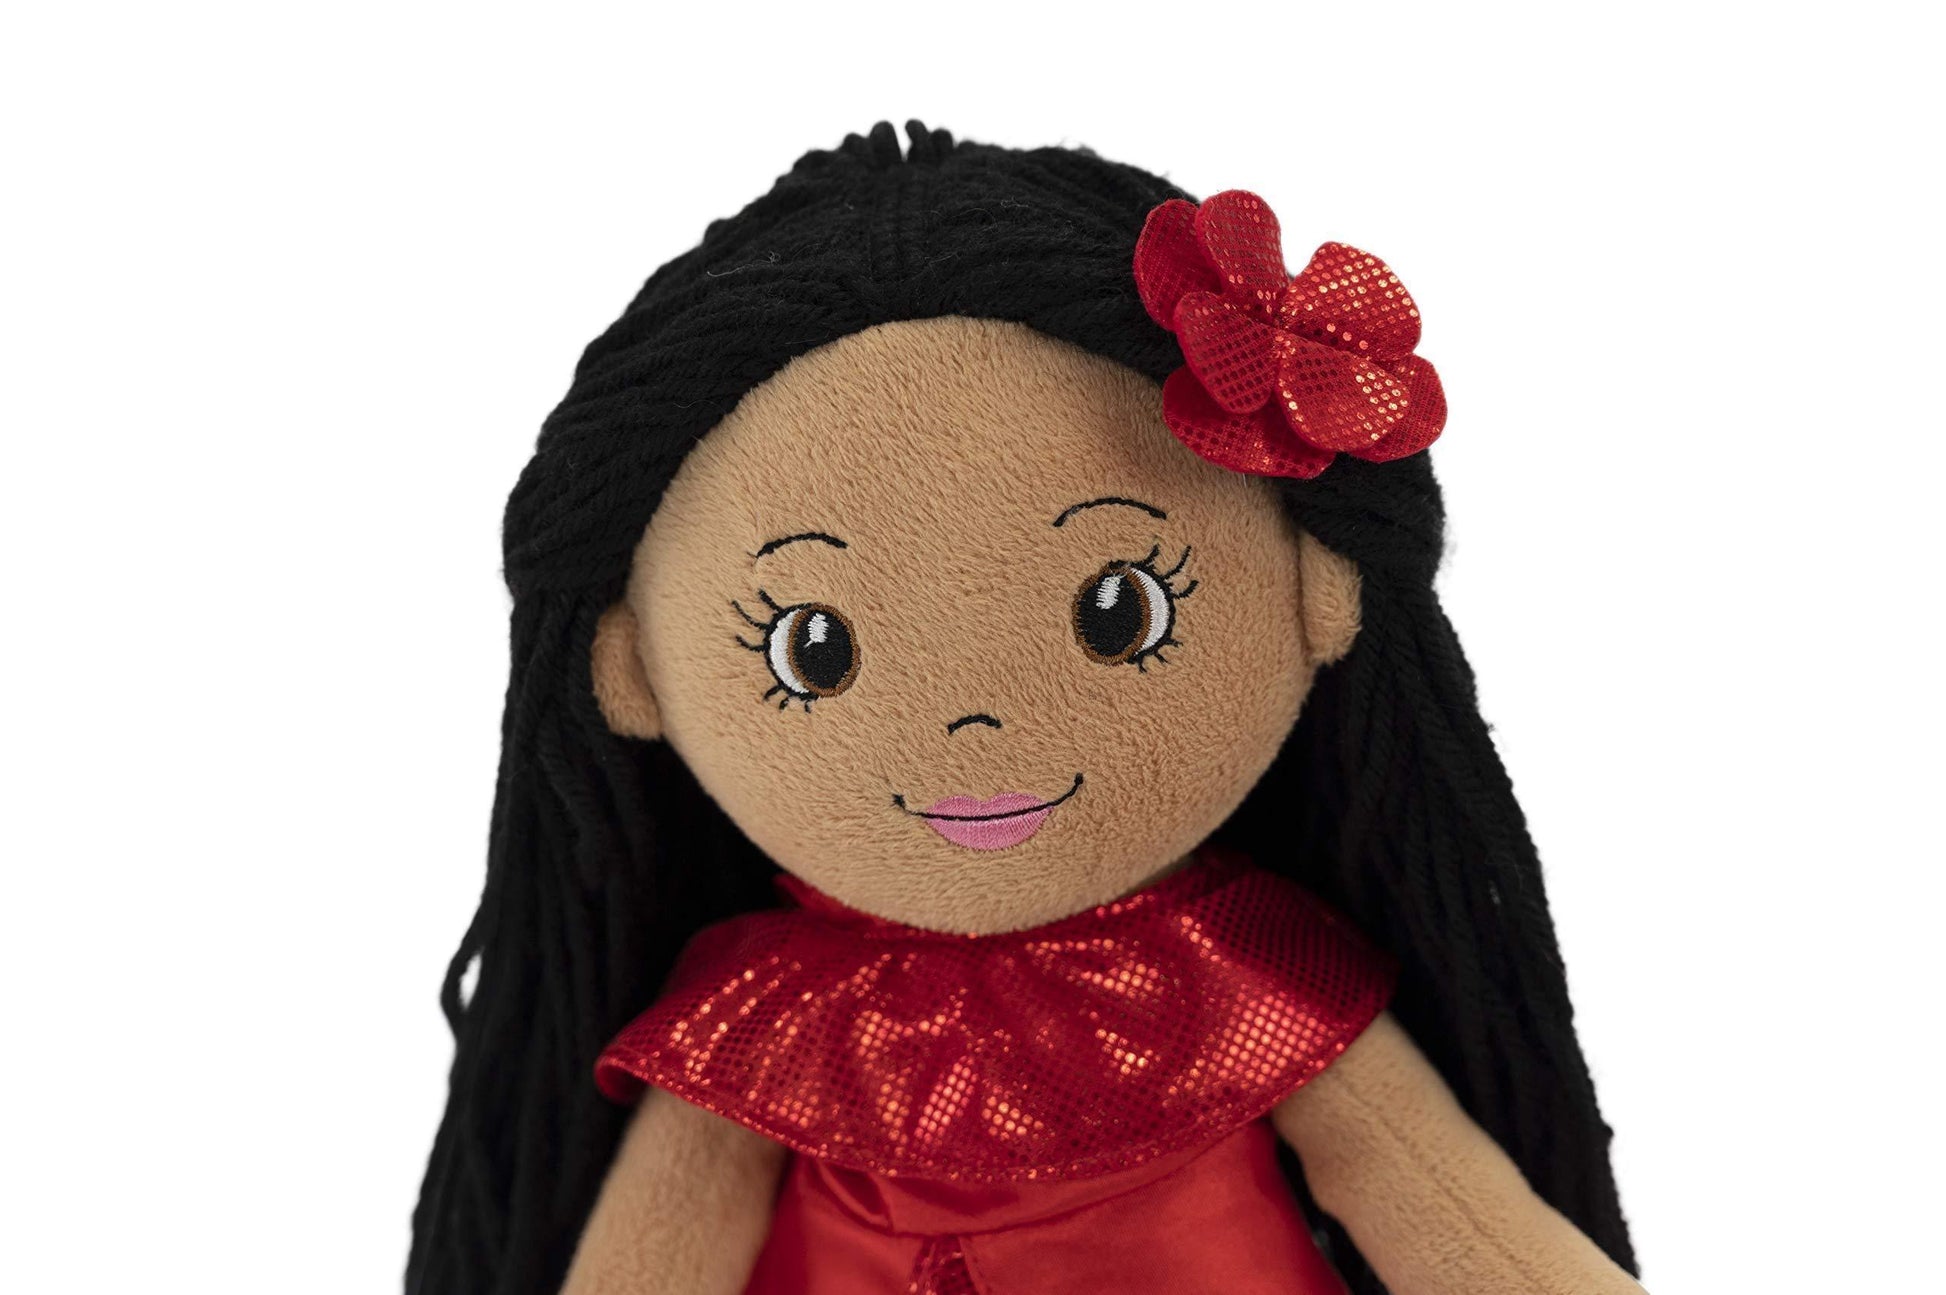 Playtime by Eimmie 14” Soft Baby Doll Plush Rag Dolls for 2 Year Old Girls & Boys Toddler & Infants Washable & Sensory Fabric Body Julie - Loomini